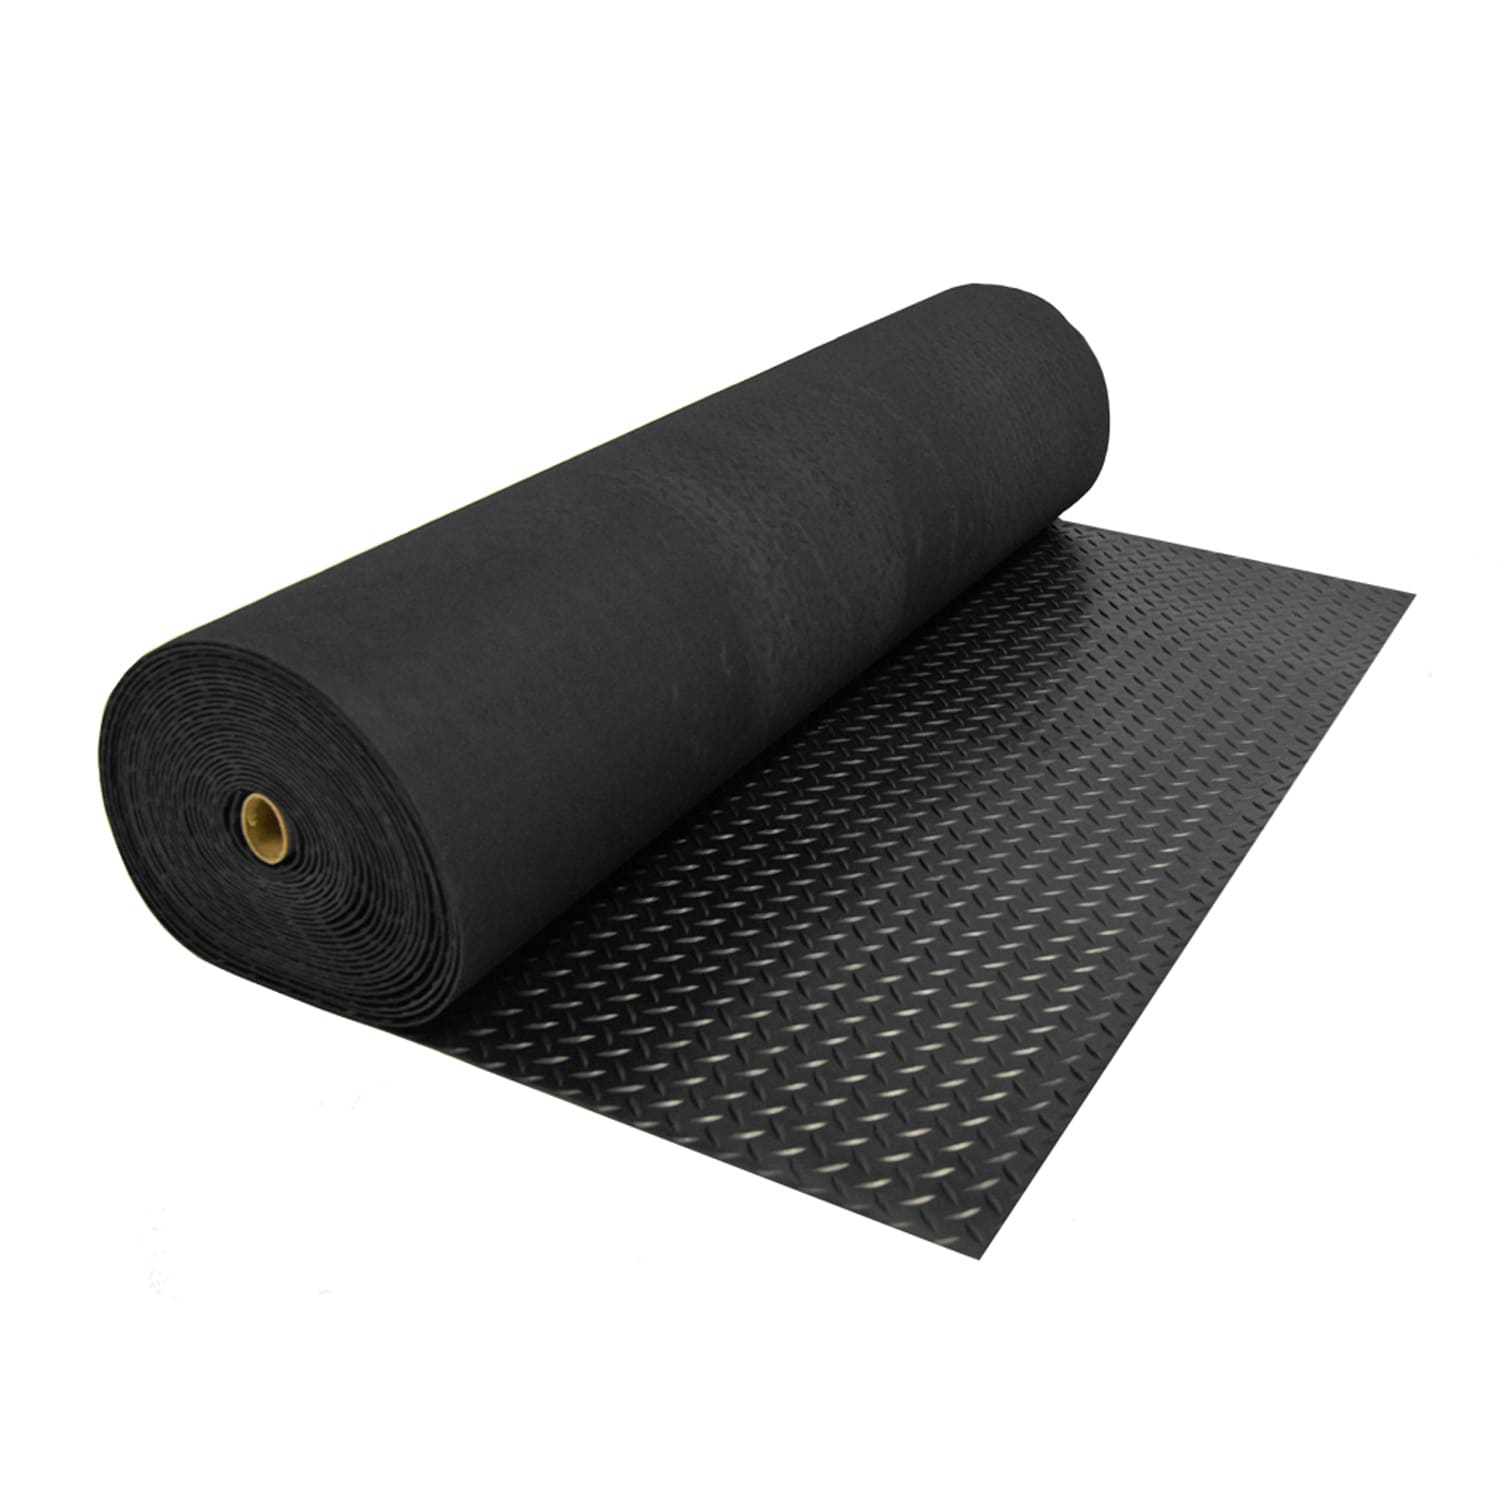 Heavy Duty Rubber Flooring Rolls / Gym Mats (IN STOCK) – Mike's Fitness  Equipment